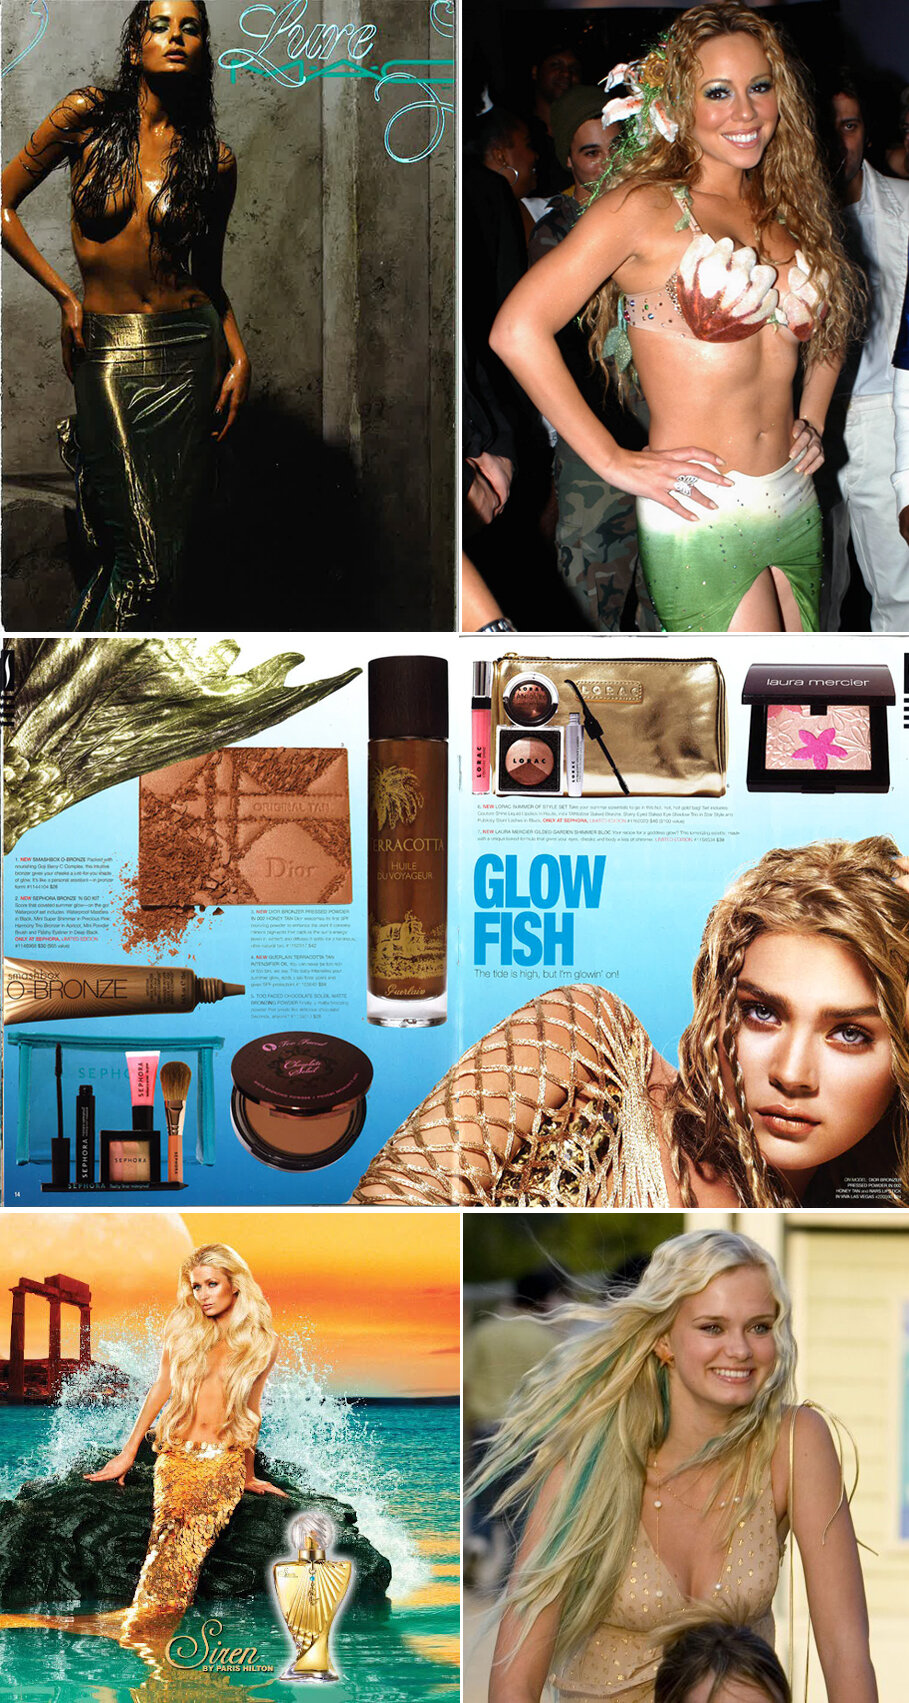   Left to right, top to bottom: Lure Collection Postcard, MAC, summer 2006; Mariah Carey at a Halloween party, 2003; Fantasea Catalog, Sephora, summer 2009; Ad for Siren fragrance by Paris Hilton, 2009; Sara Paxton as mermaid Aquamarine, 2006.     Wh